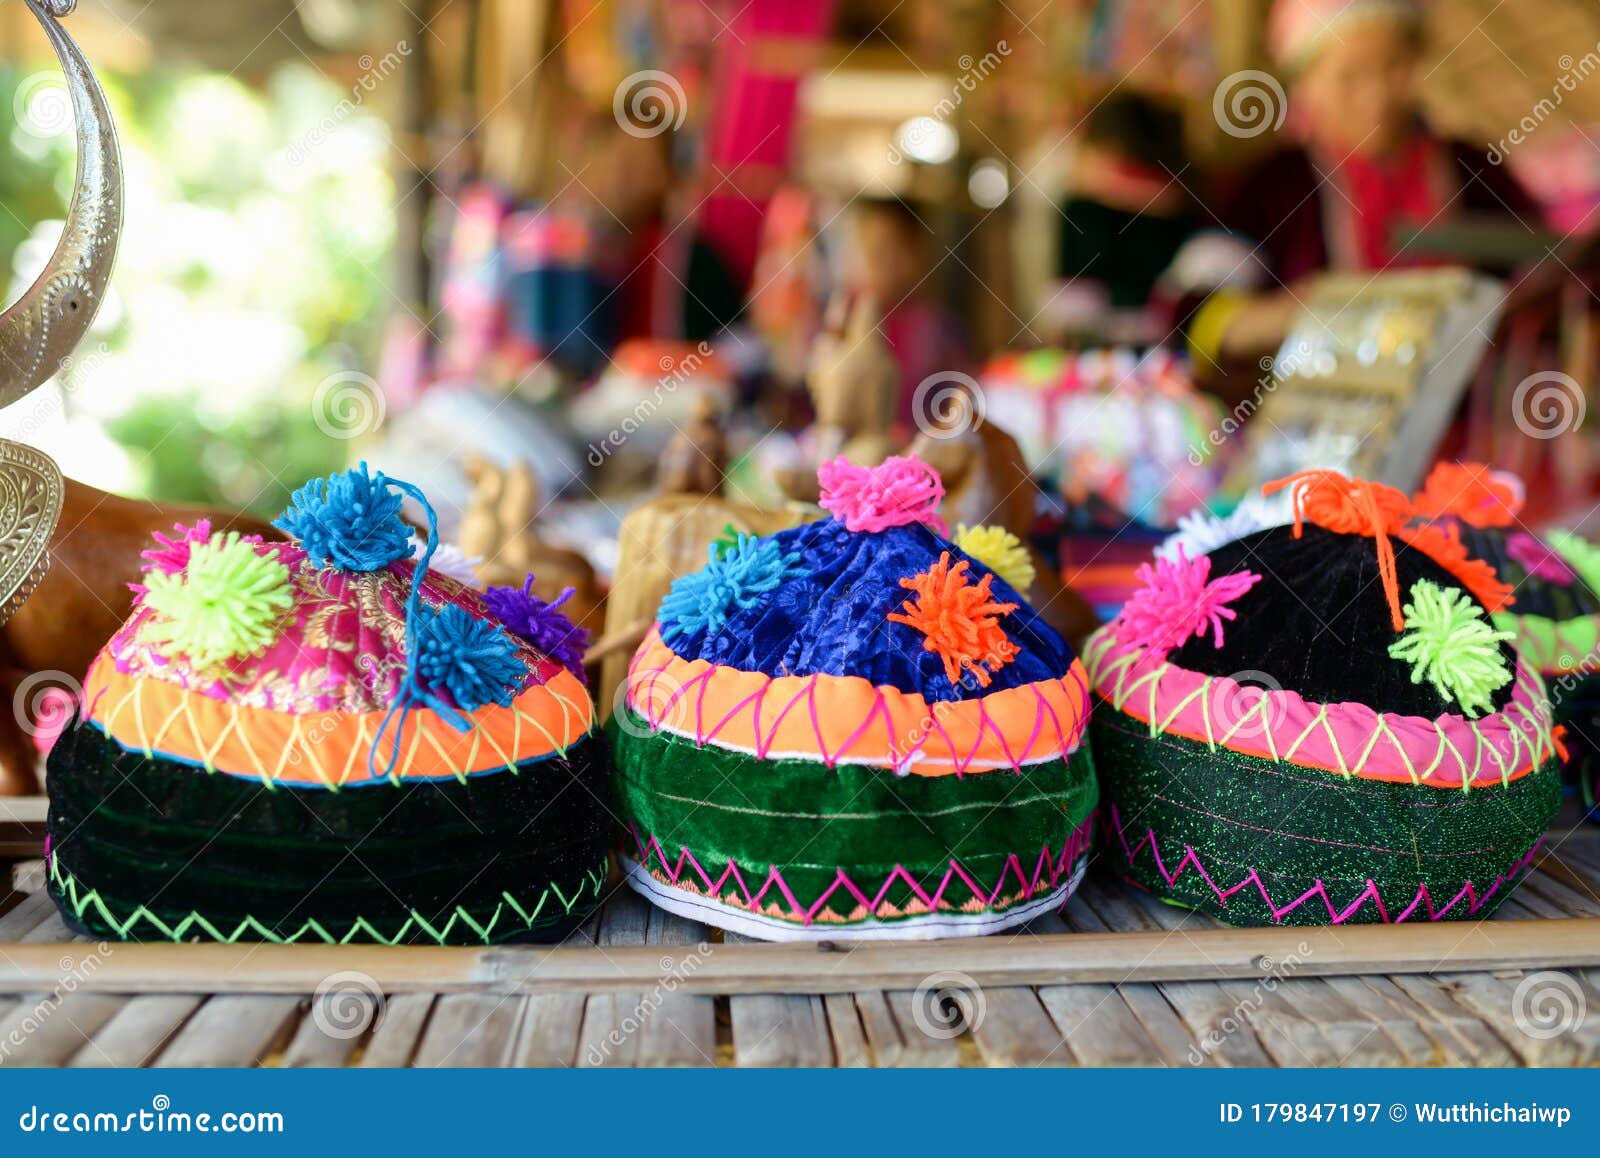 Colorful Tribal Doll.Tribal Souvenir.Tribal Jewelry. Stock Image ...